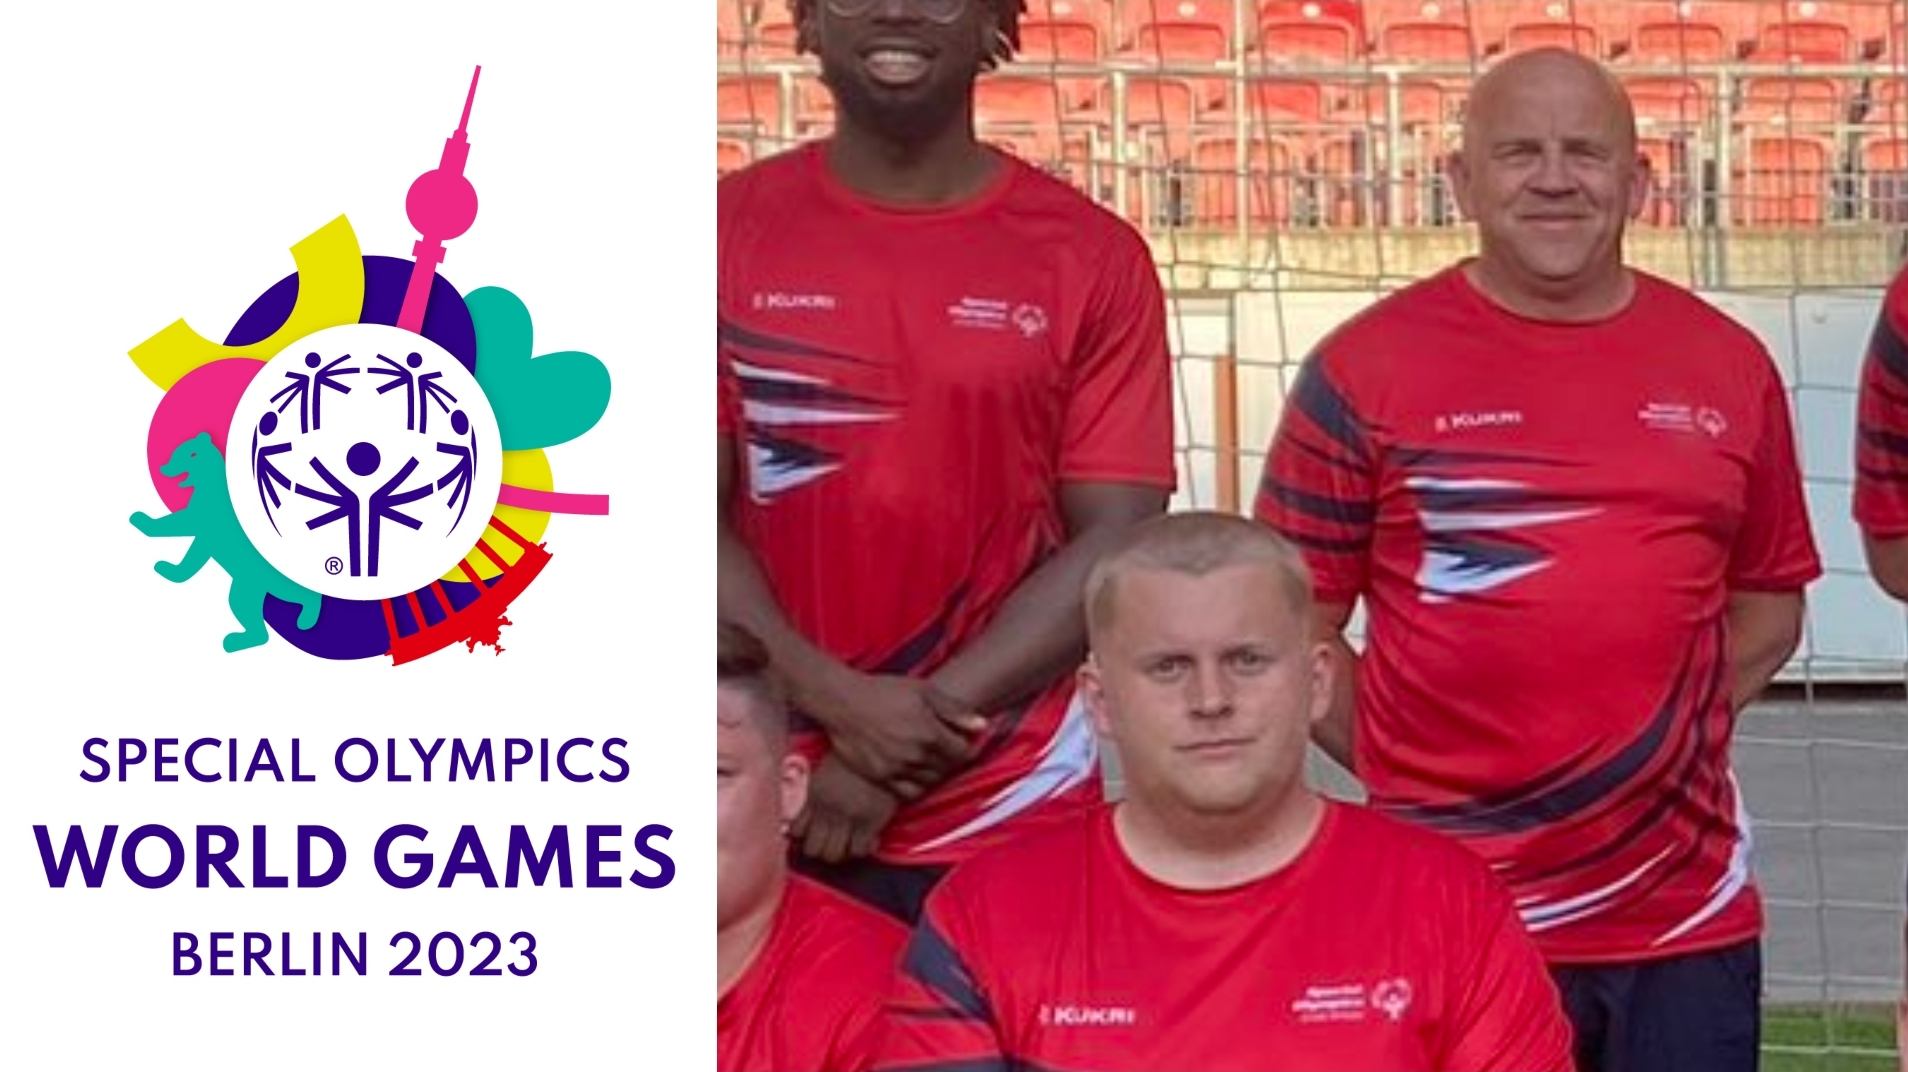 The Father-son duo hoping to bring home a gold medal for Special Olympics GB